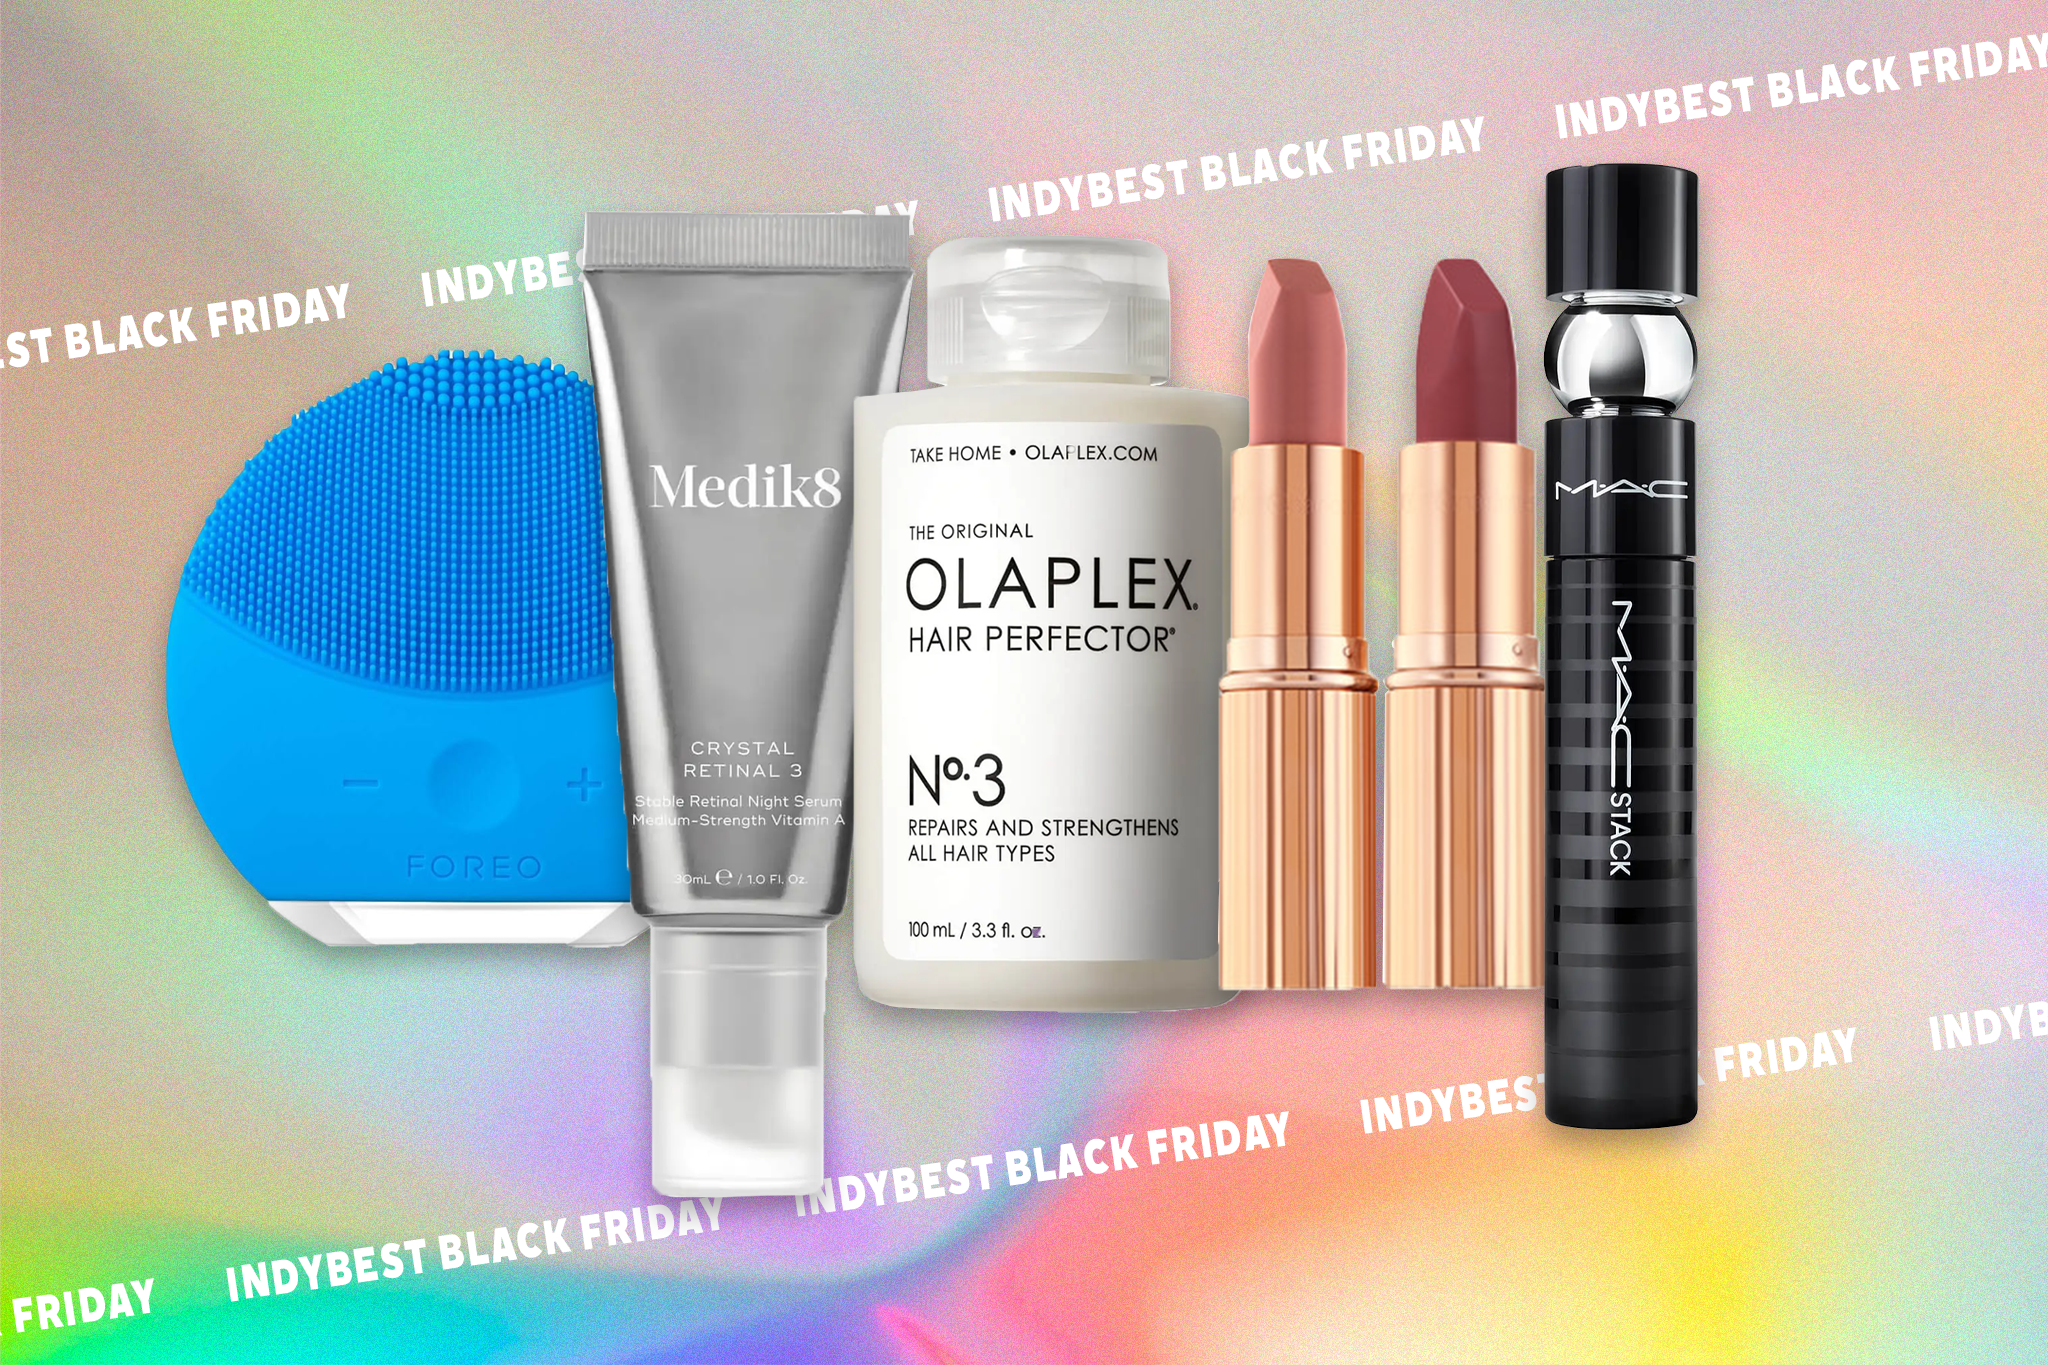 beauty, make-up, indybest, amazon, black friday, best black friday beauty deals on make-up, skincare and more